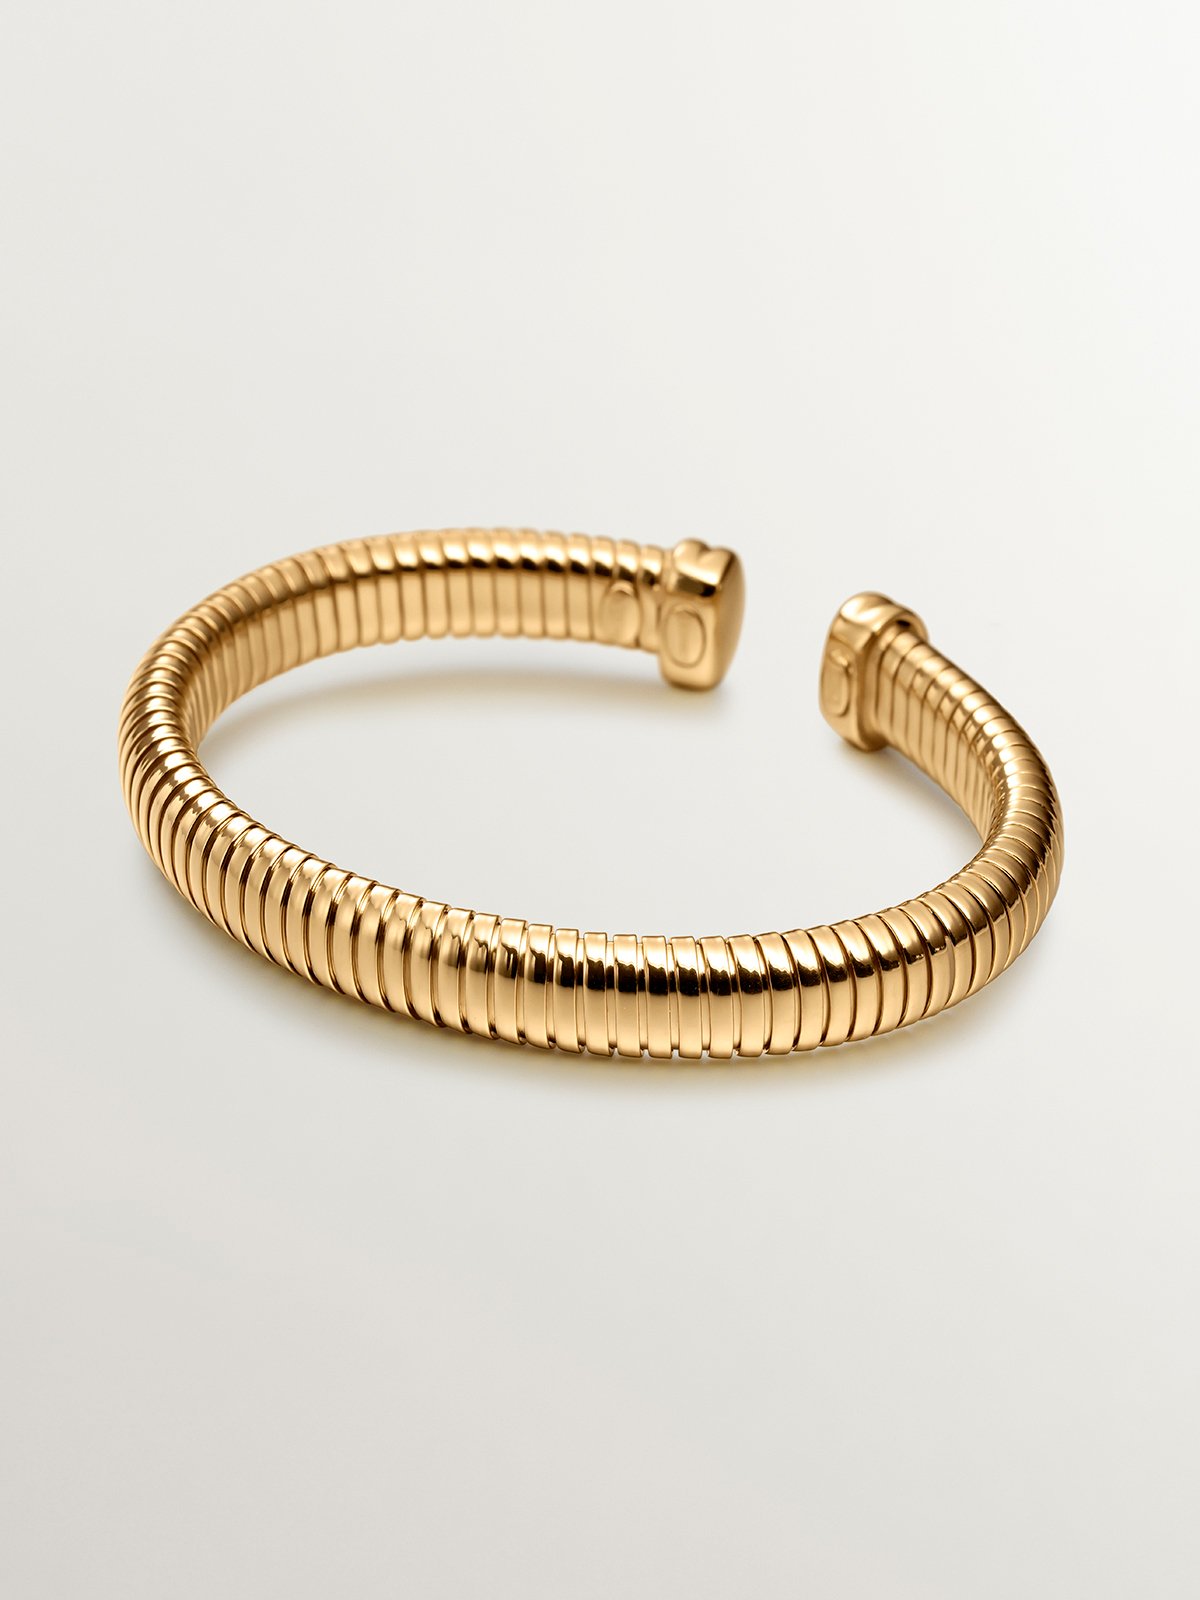 18K yellow gold plated 925 silver tumbagas bracelet